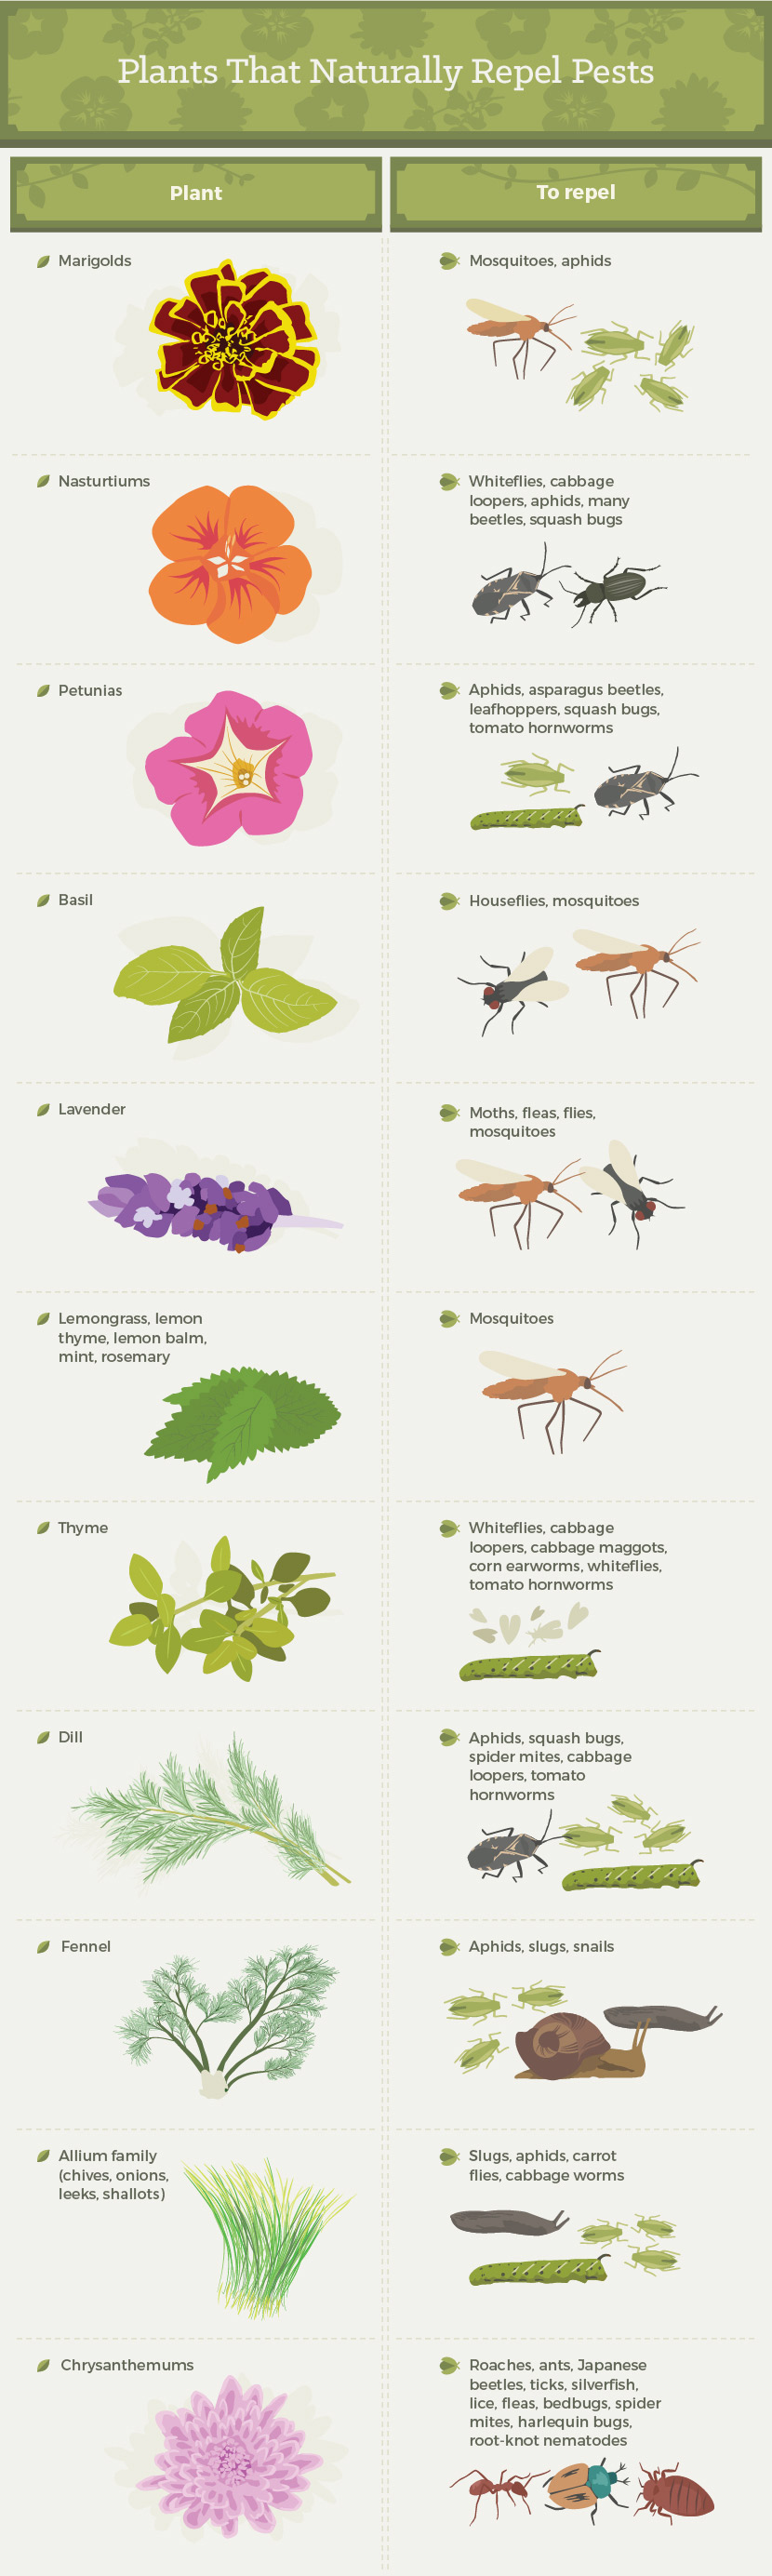 How to Naturally Get Rid of Bugs on Plants